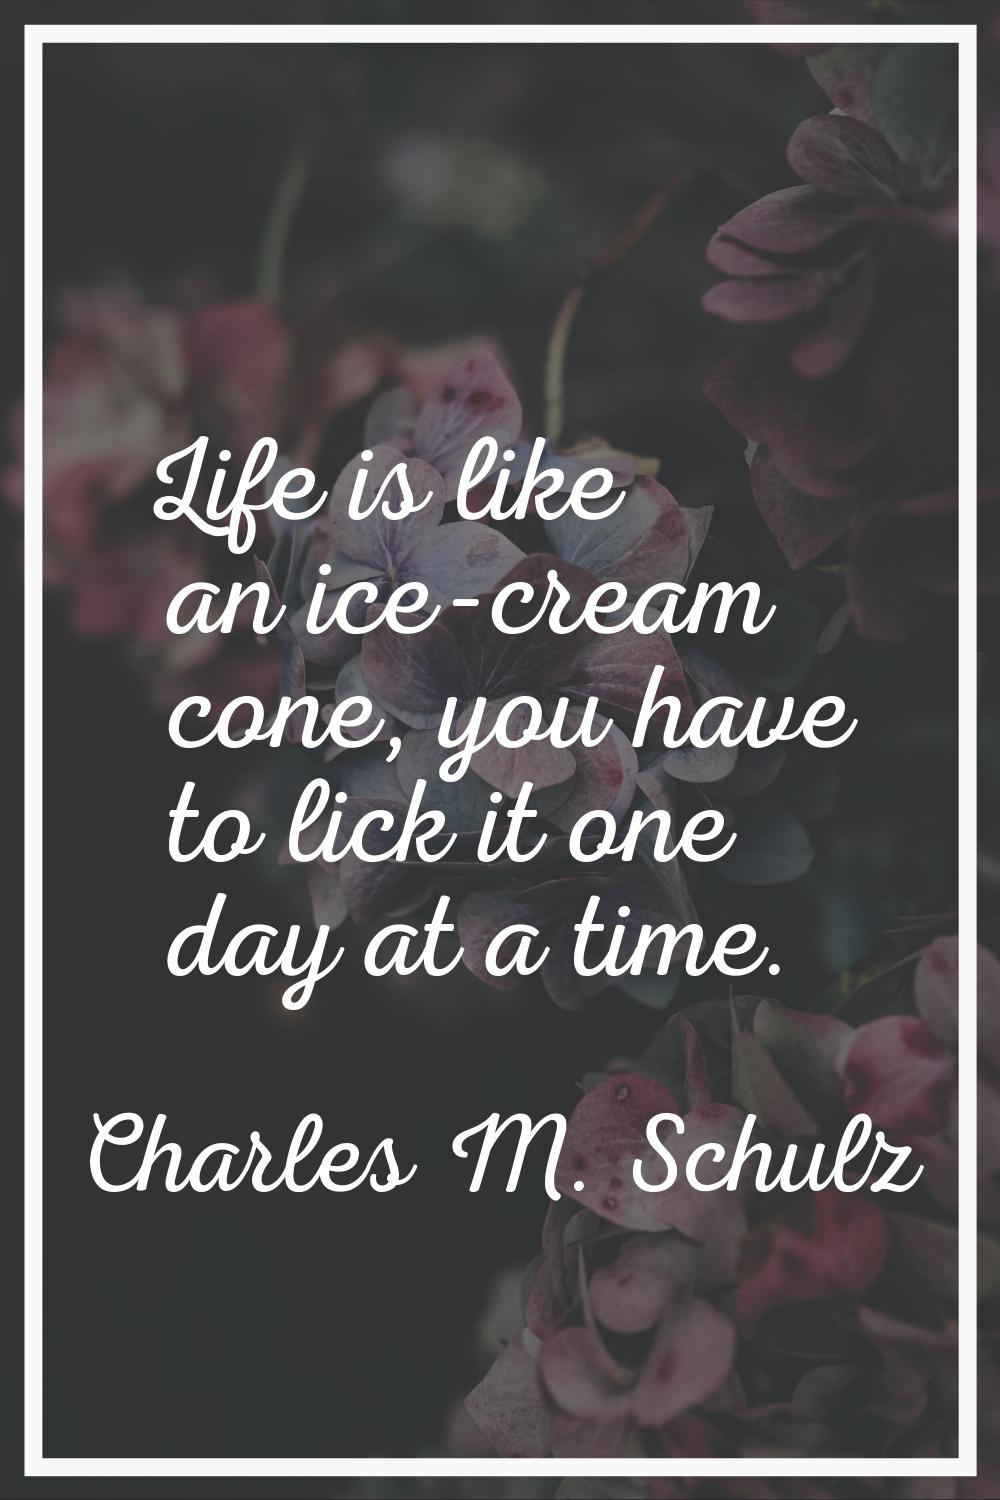 Life is like an ice-cream cone, you have to lick it one day at a time.